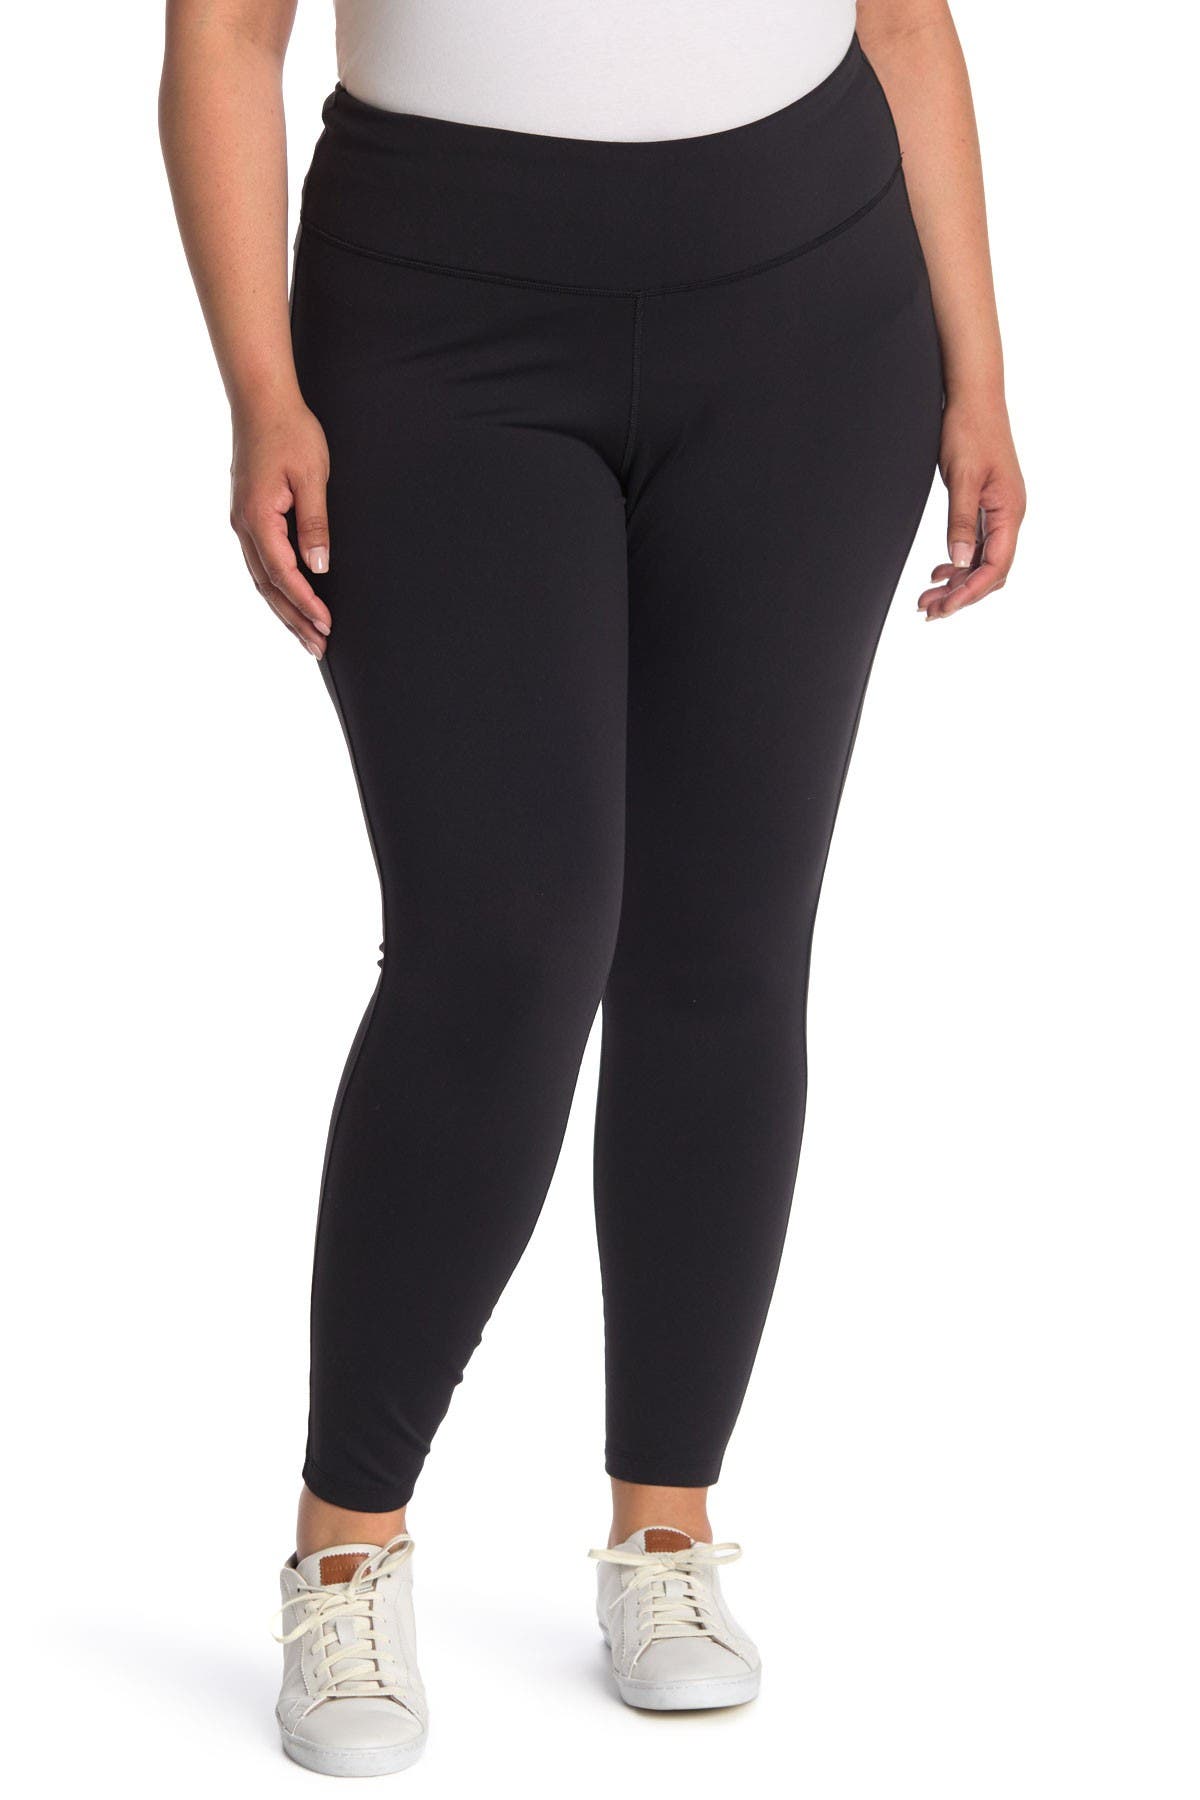 north face motivation high rise tights